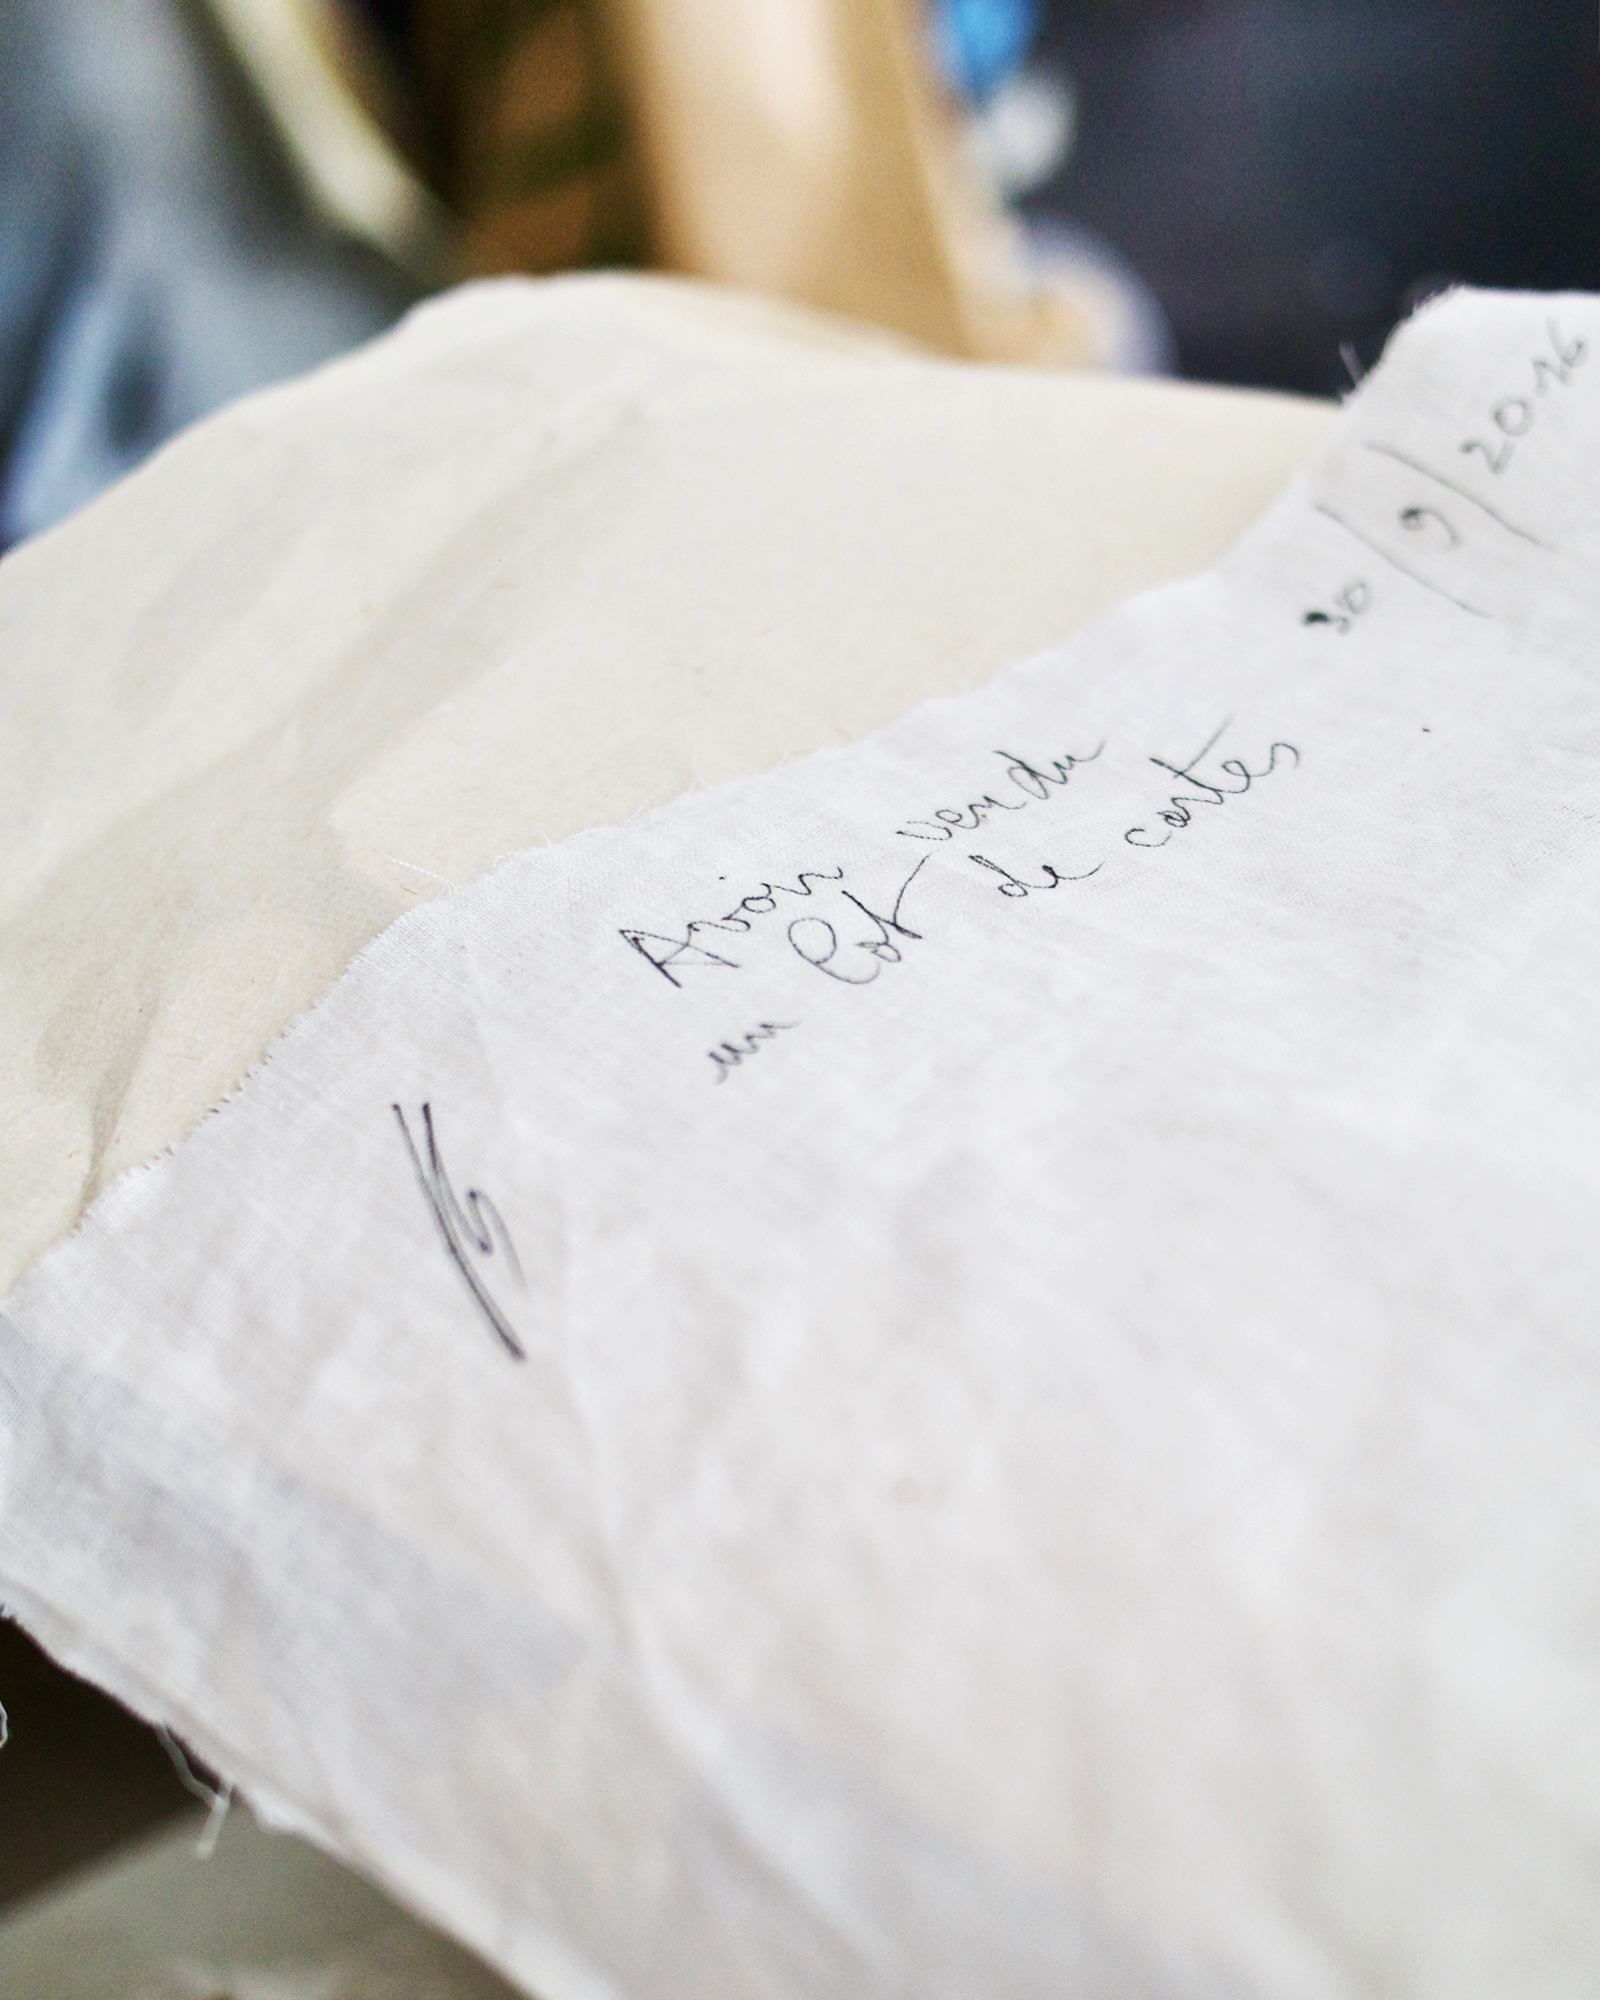 French handwritten text on an old white sheet of paper